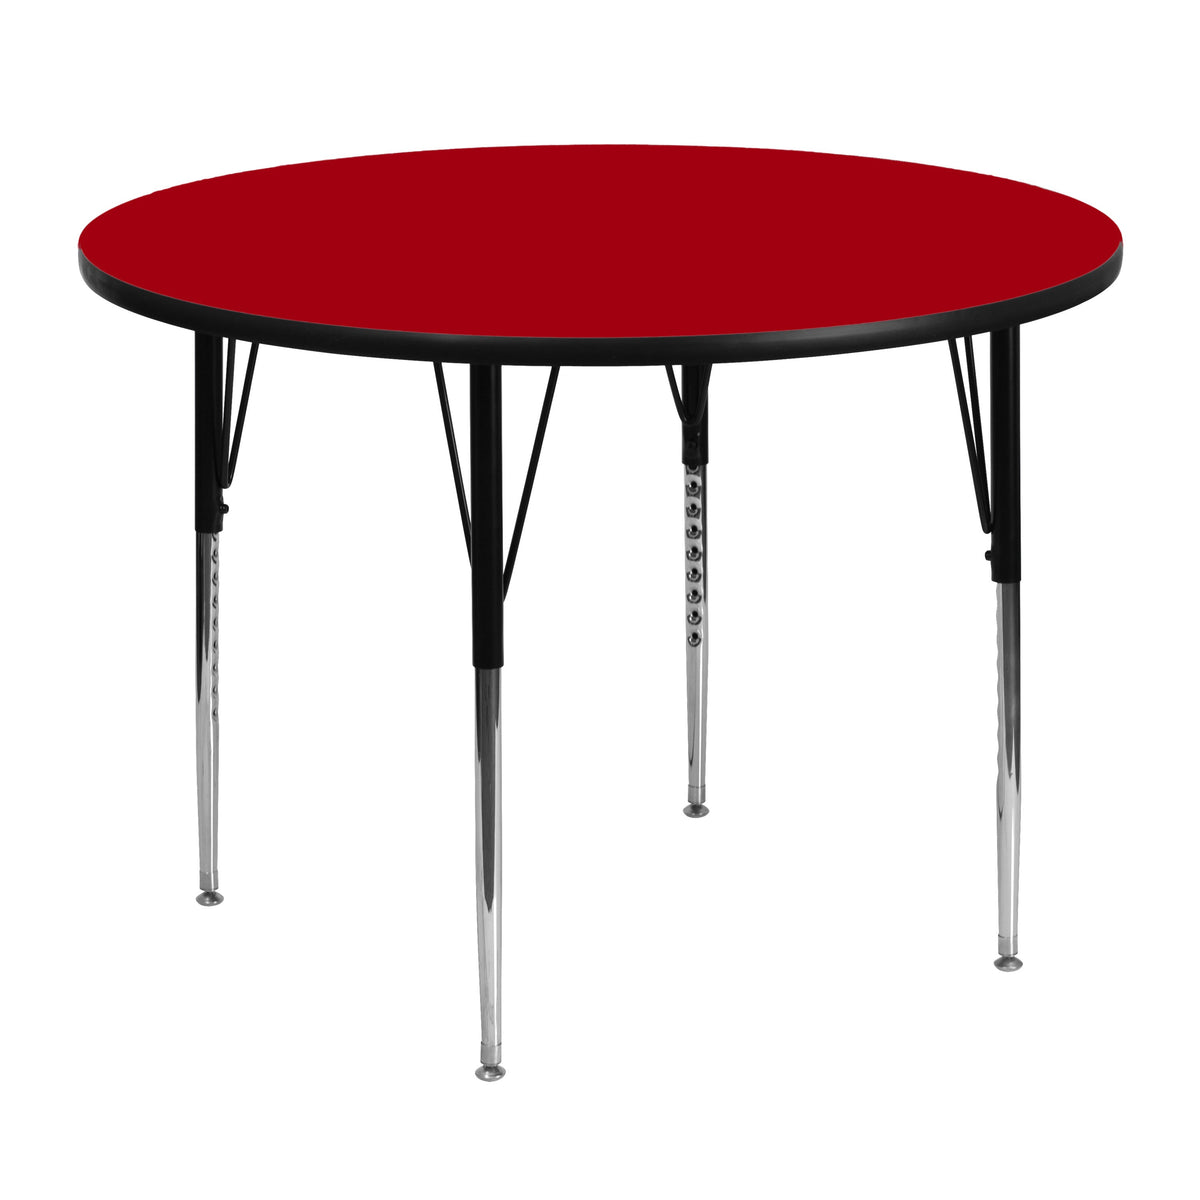 Red |#| 48inch Round Red Thermal Laminate Activity Table - Standard Height Adjustable Legs